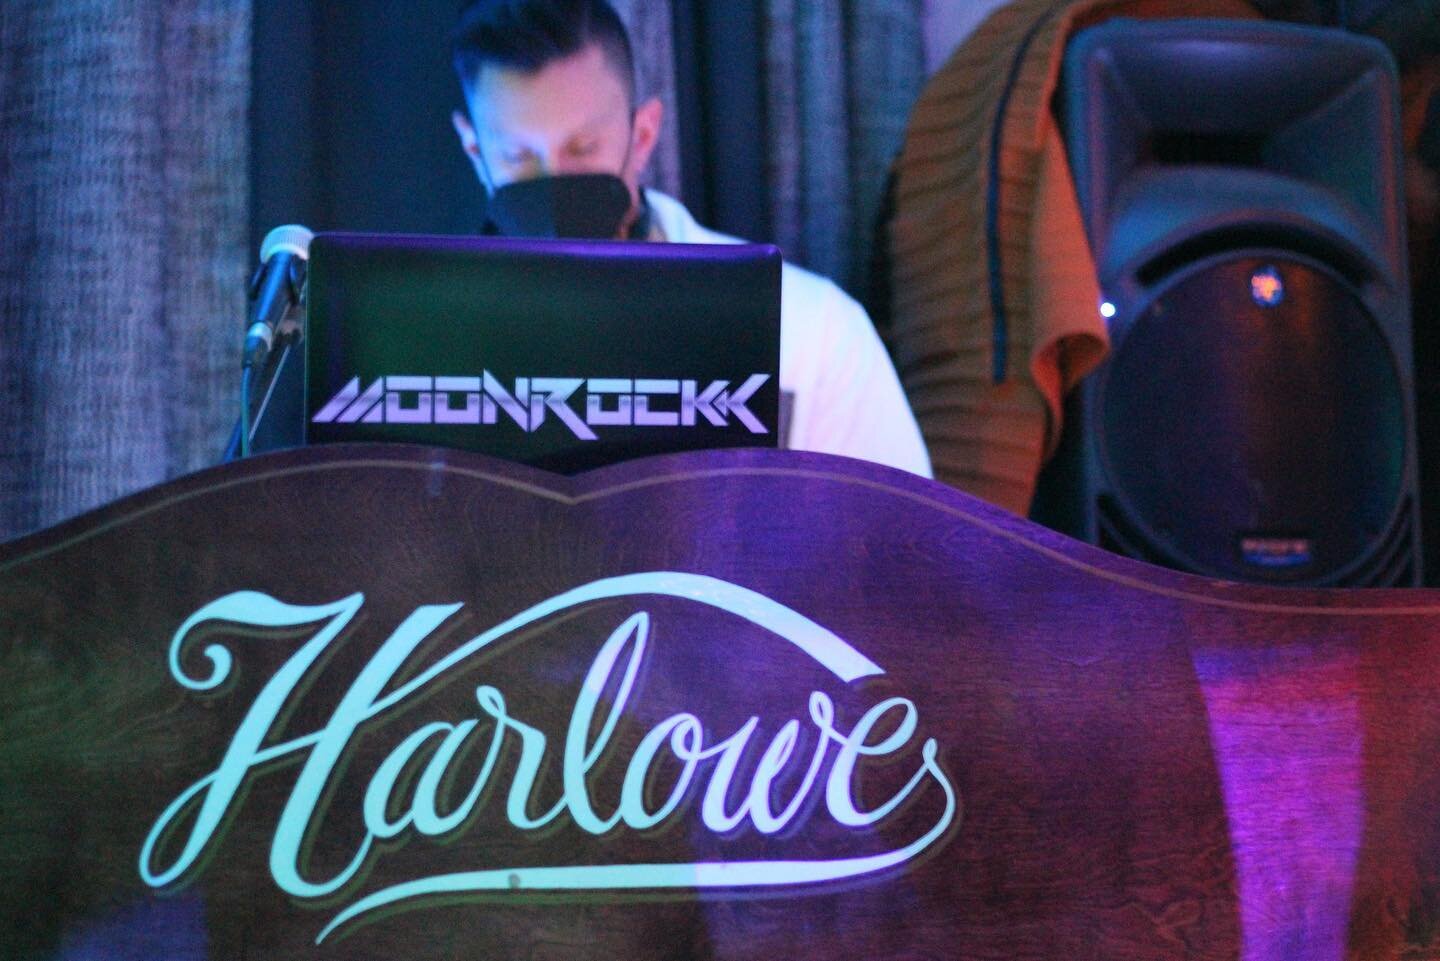 Who&rsquo;s ready for another bumpin&rsquo; Friday night with @djmoonrockk ? 

#harlowela #fridayvibes #wehonights #dj #nightlife